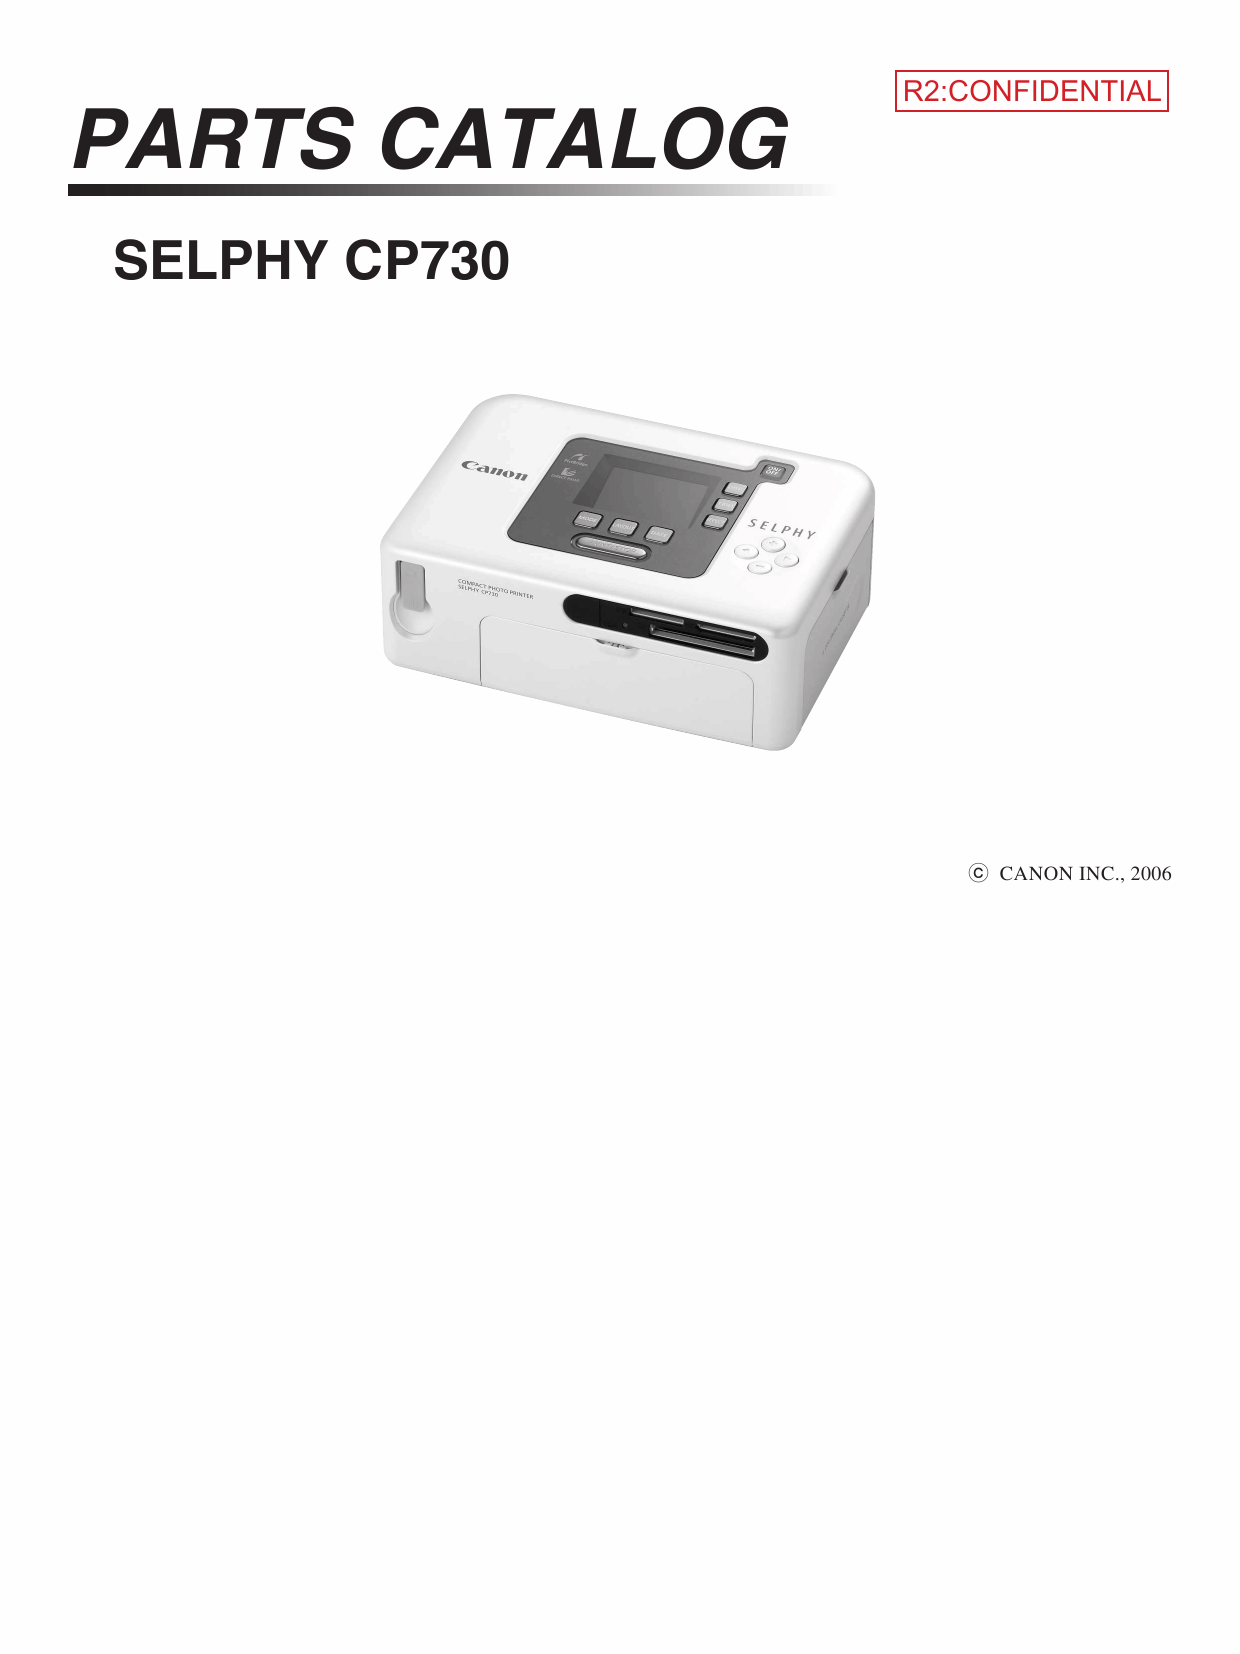 Canon SELPHY CP730 Parts Catalog Manual-1